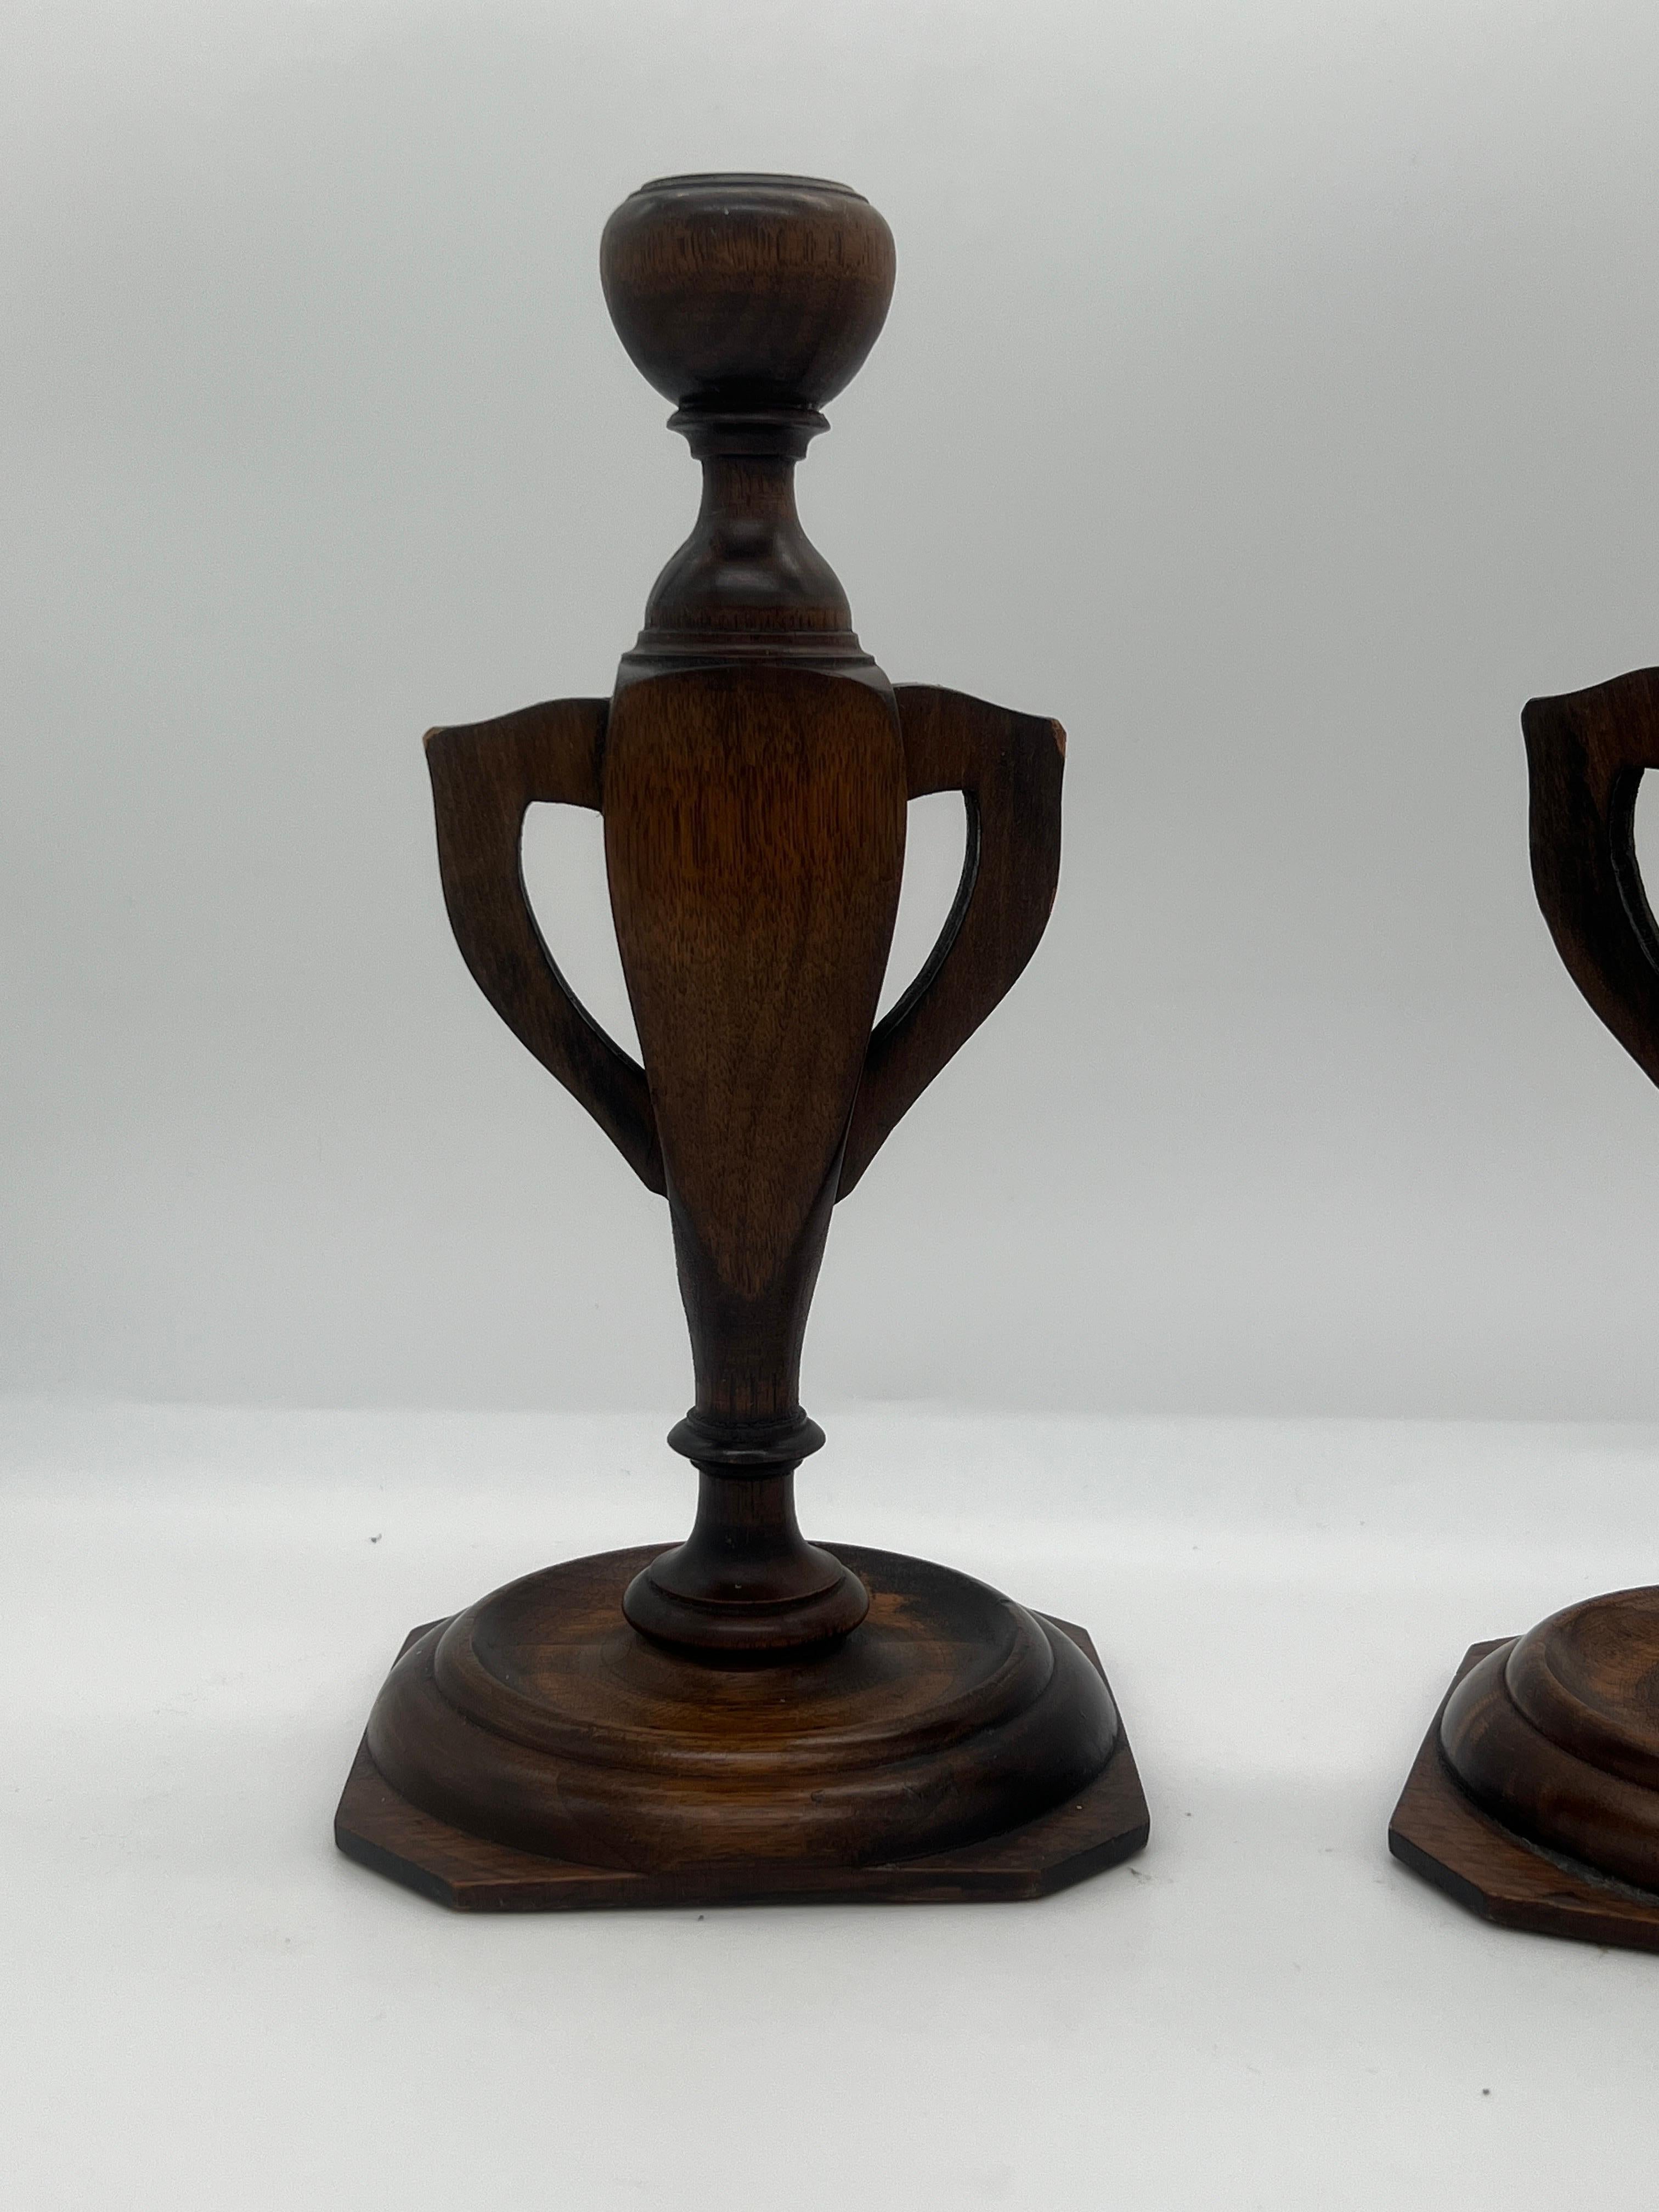 Likely American, circa 1910. 

A pair of carved wood possibly oak or walnut candlesticks in the form of trophy urns. Unmarked. 